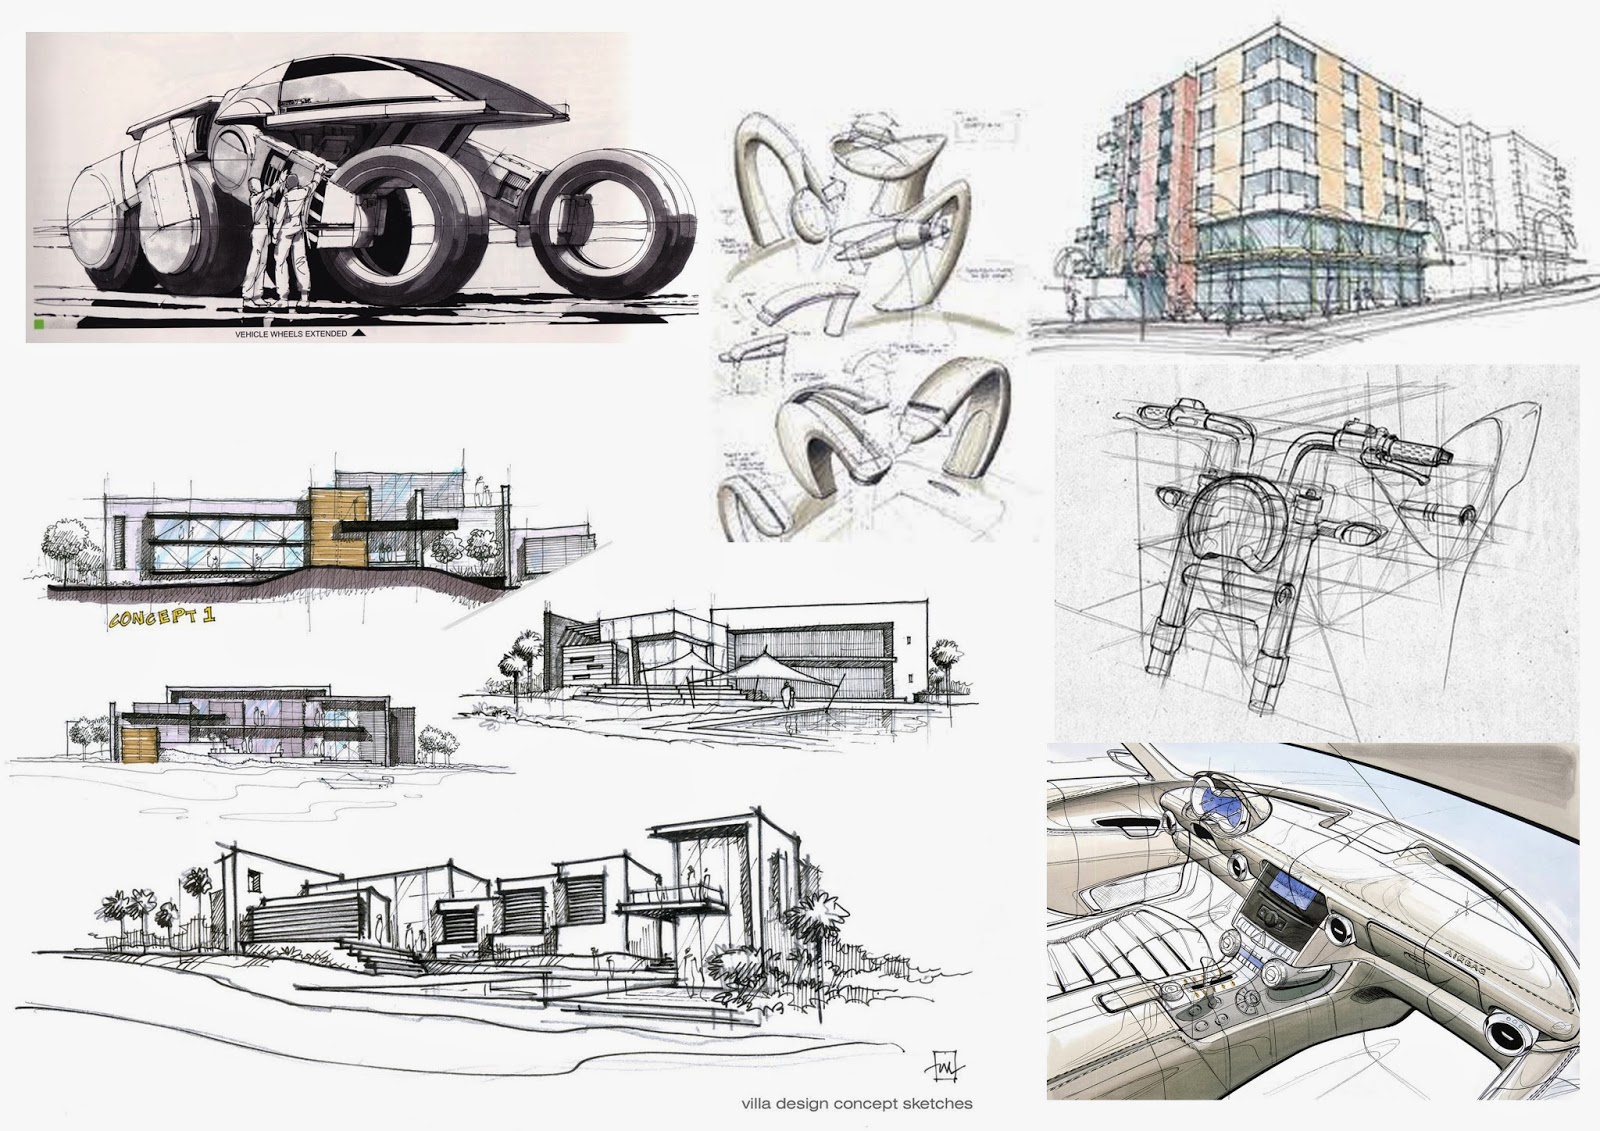 Sketching Project Topic 2: Architecture